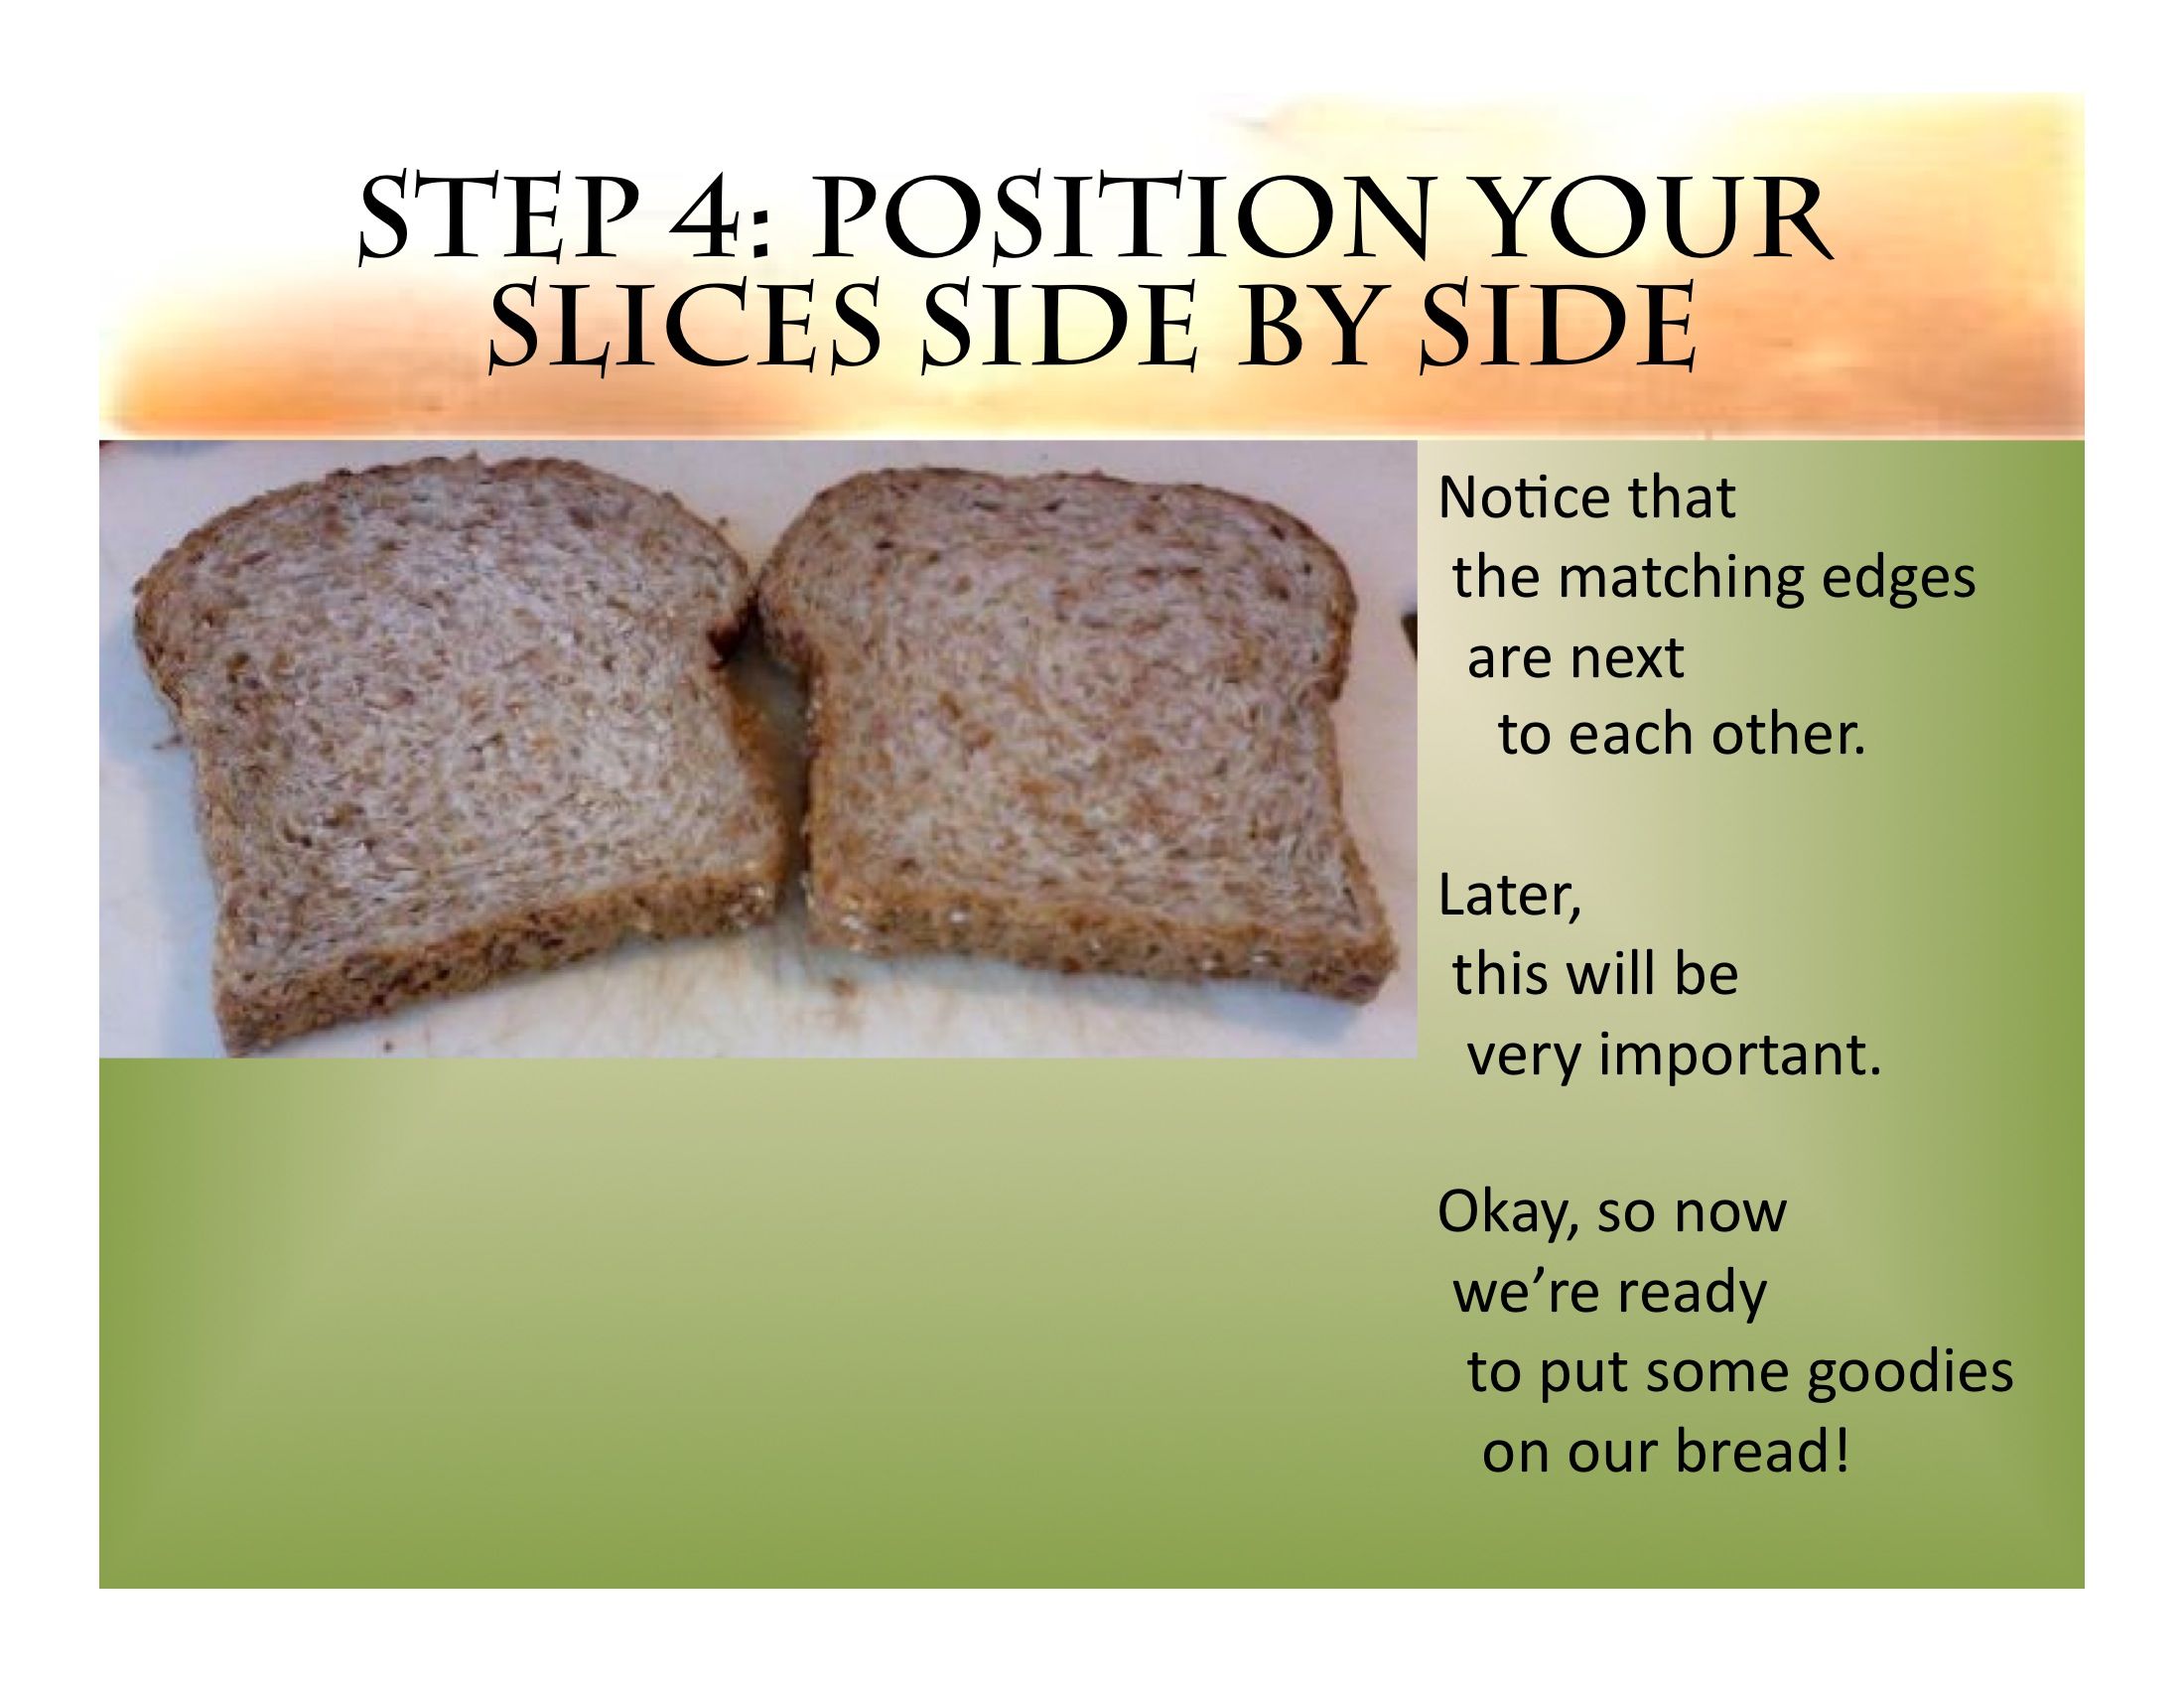 Step 4: Position the Slices